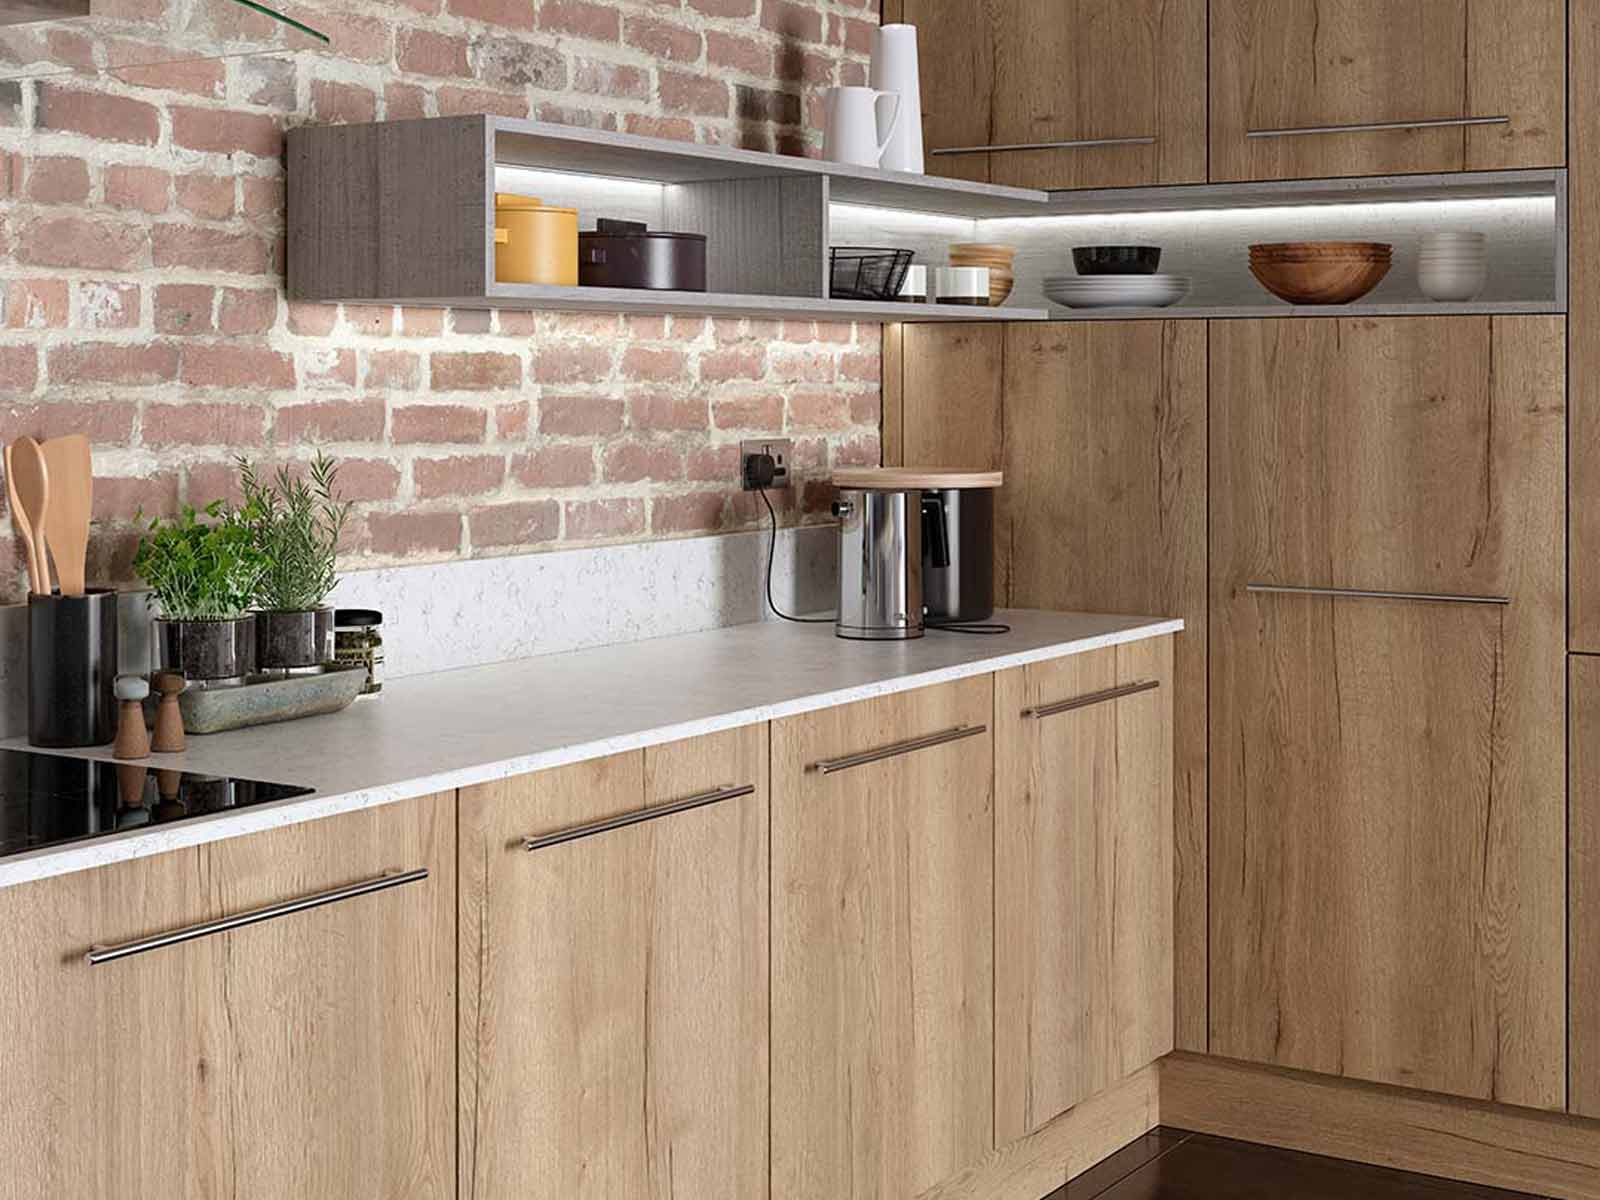 Portland oak kitchenette against a brick wall with floating shelves